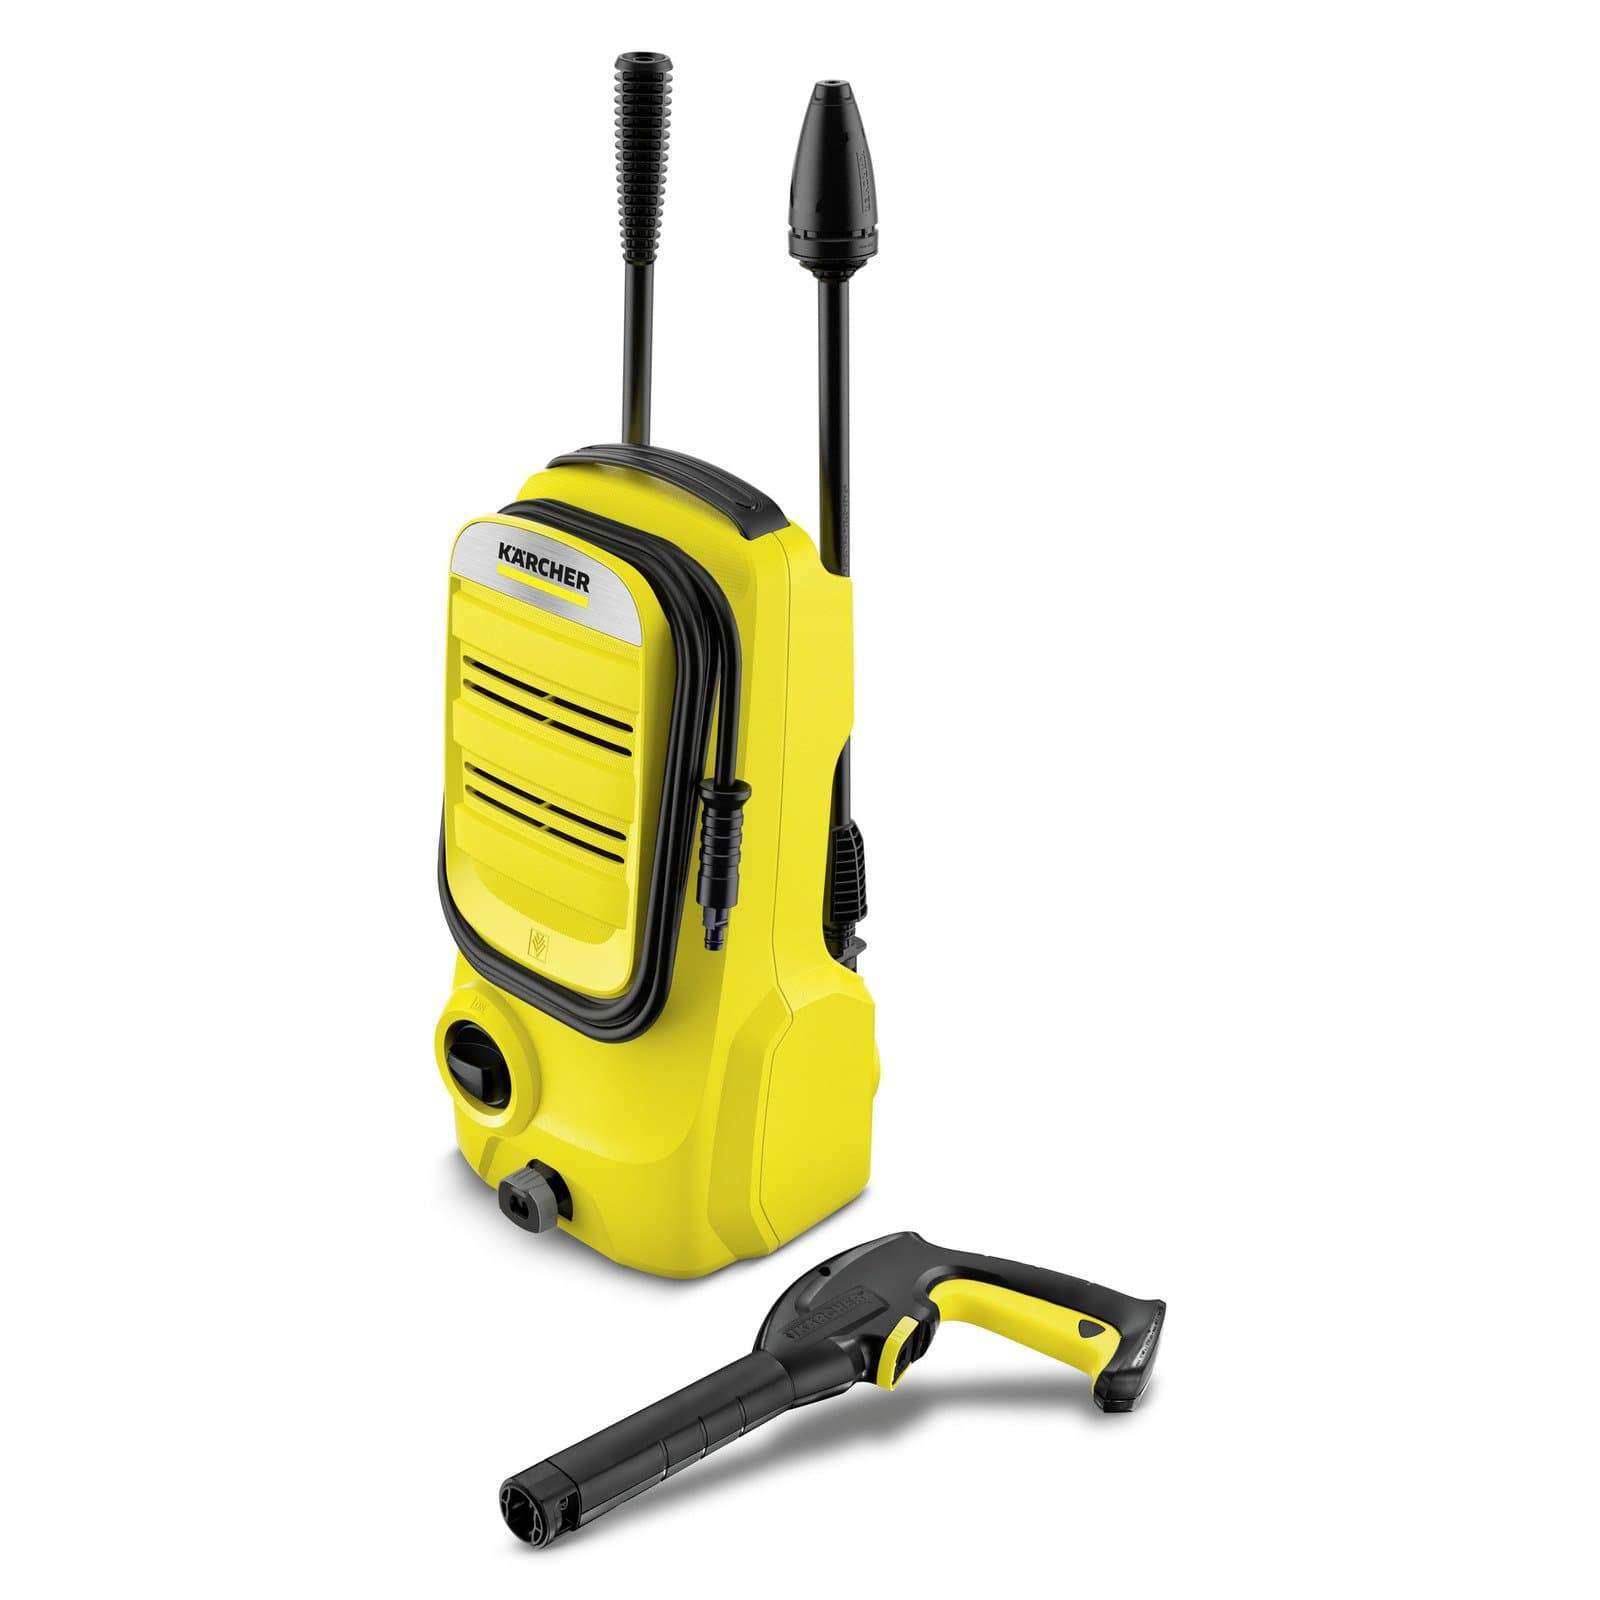 Karcher Electric K2 Compact High Pressure Washer 110 Bar | Supply Master | Accra, Ghana Tools Building Steel Engineering Hardware tool